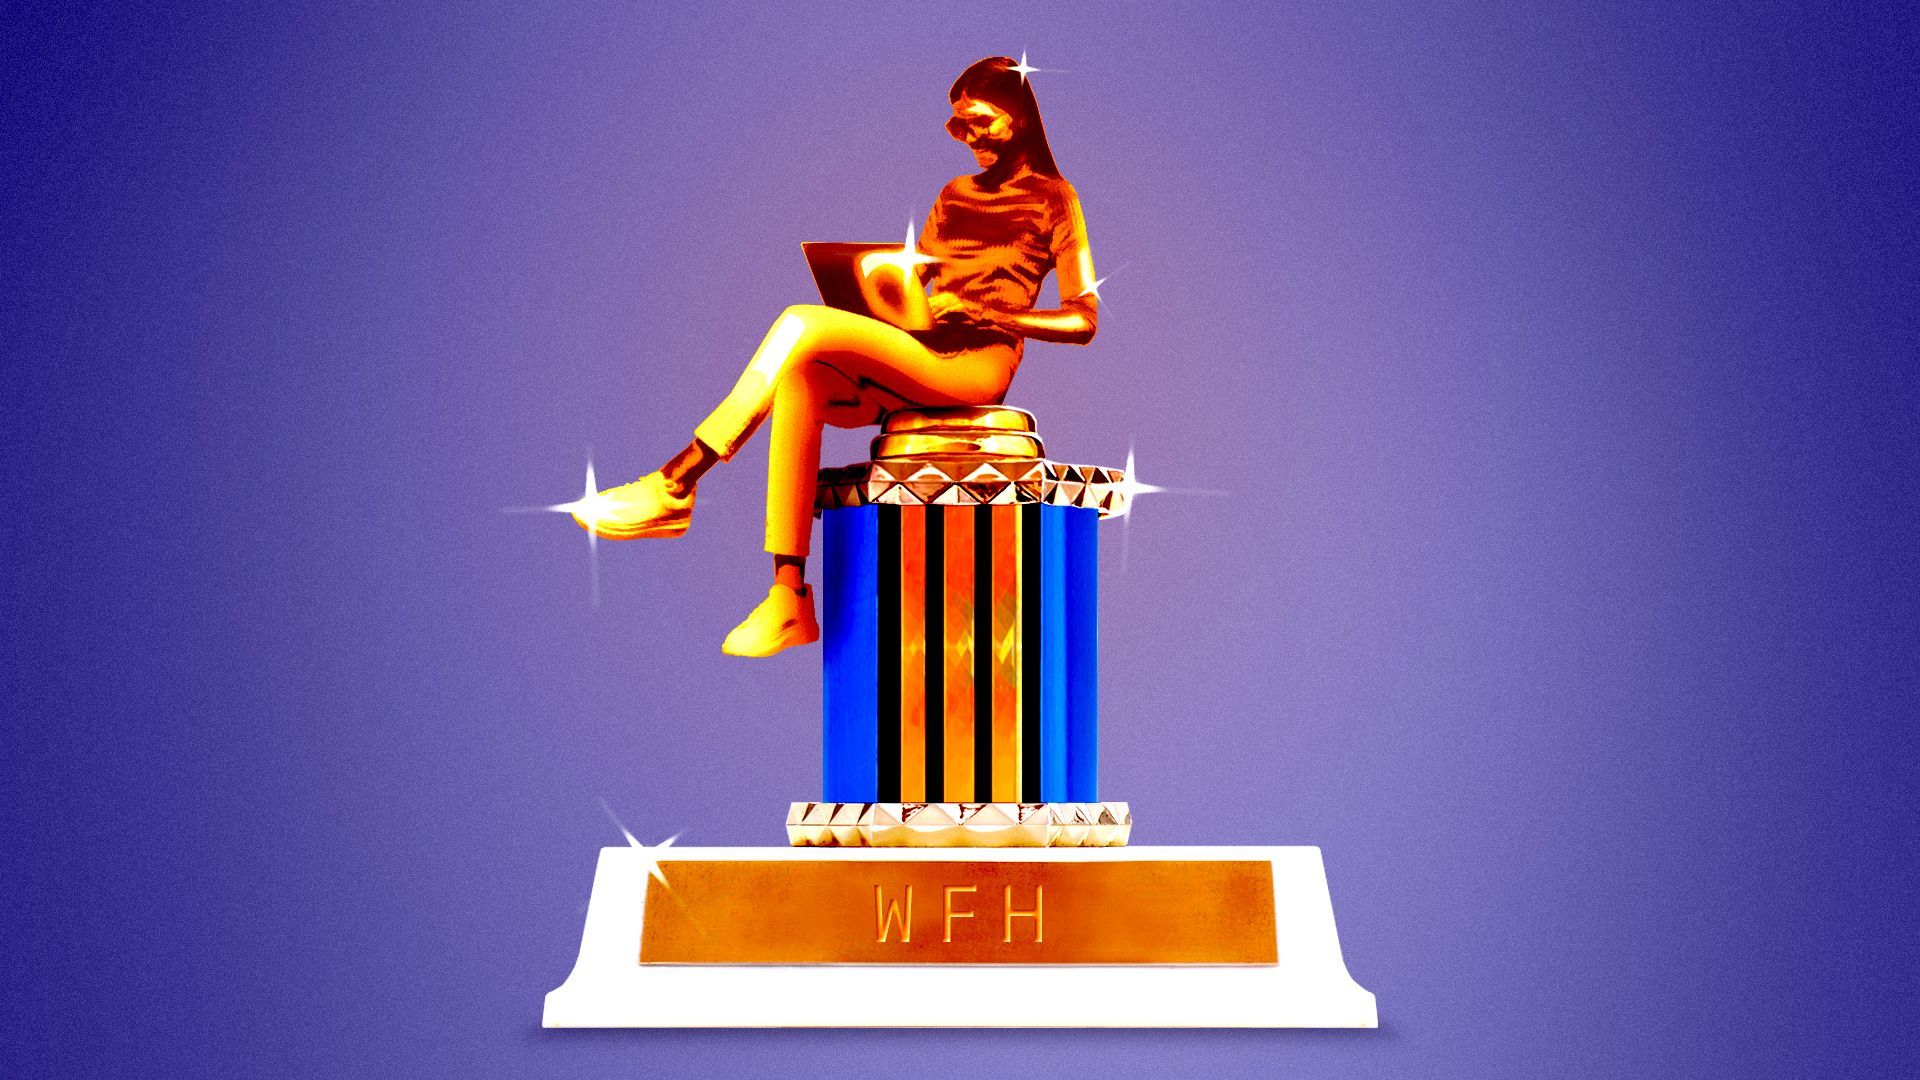 Illustration of a trophy labeled "WFH" with a figurine on top posed in a seated position and typing on a laptop. 